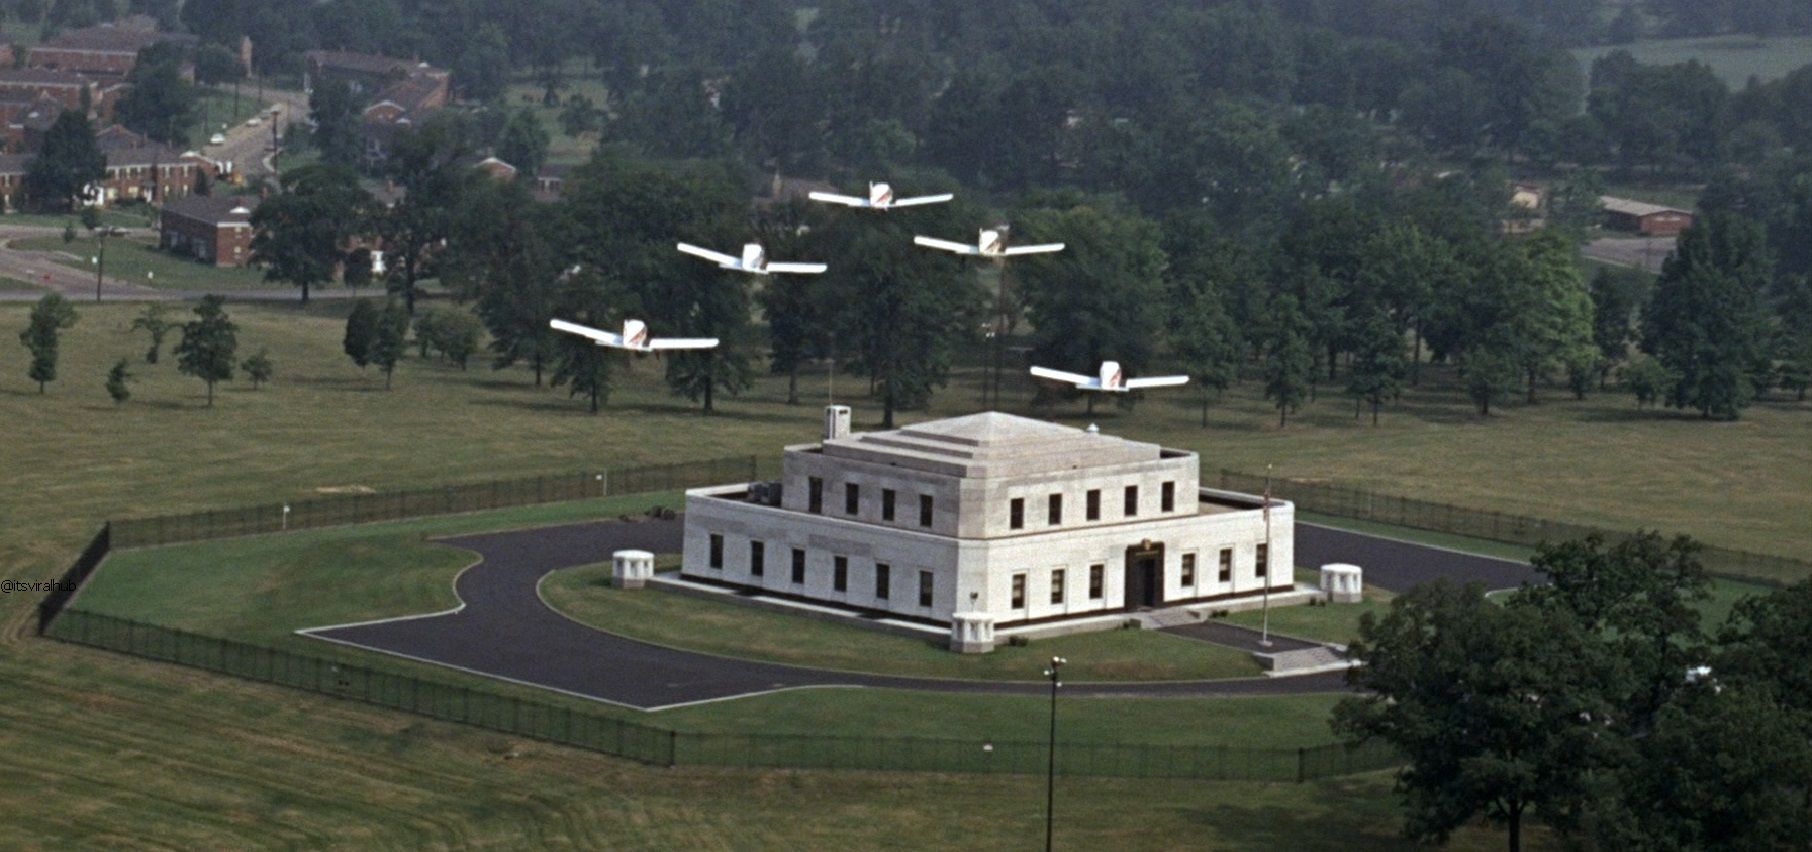  Fort Knox, United States